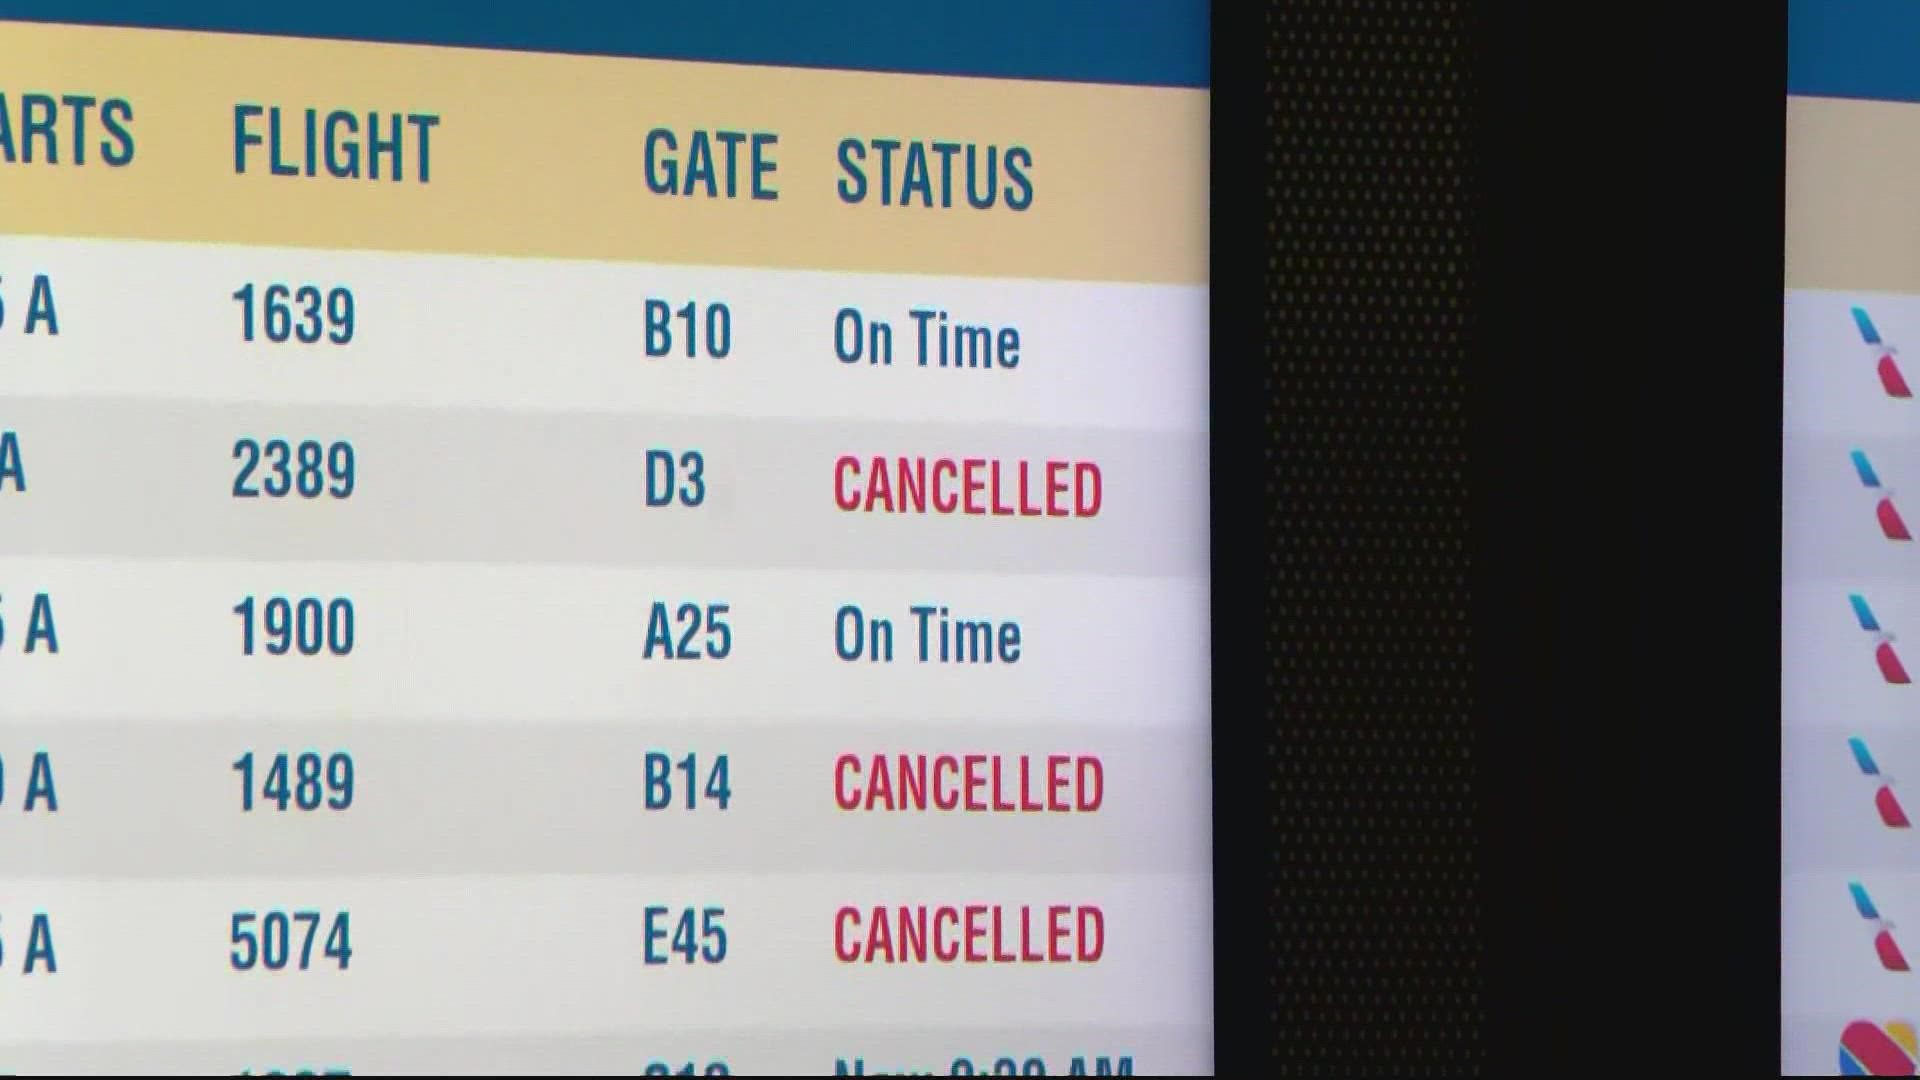 The FAA says it's going to conduct a thorough review of the system failure that caused flights to be grounded.